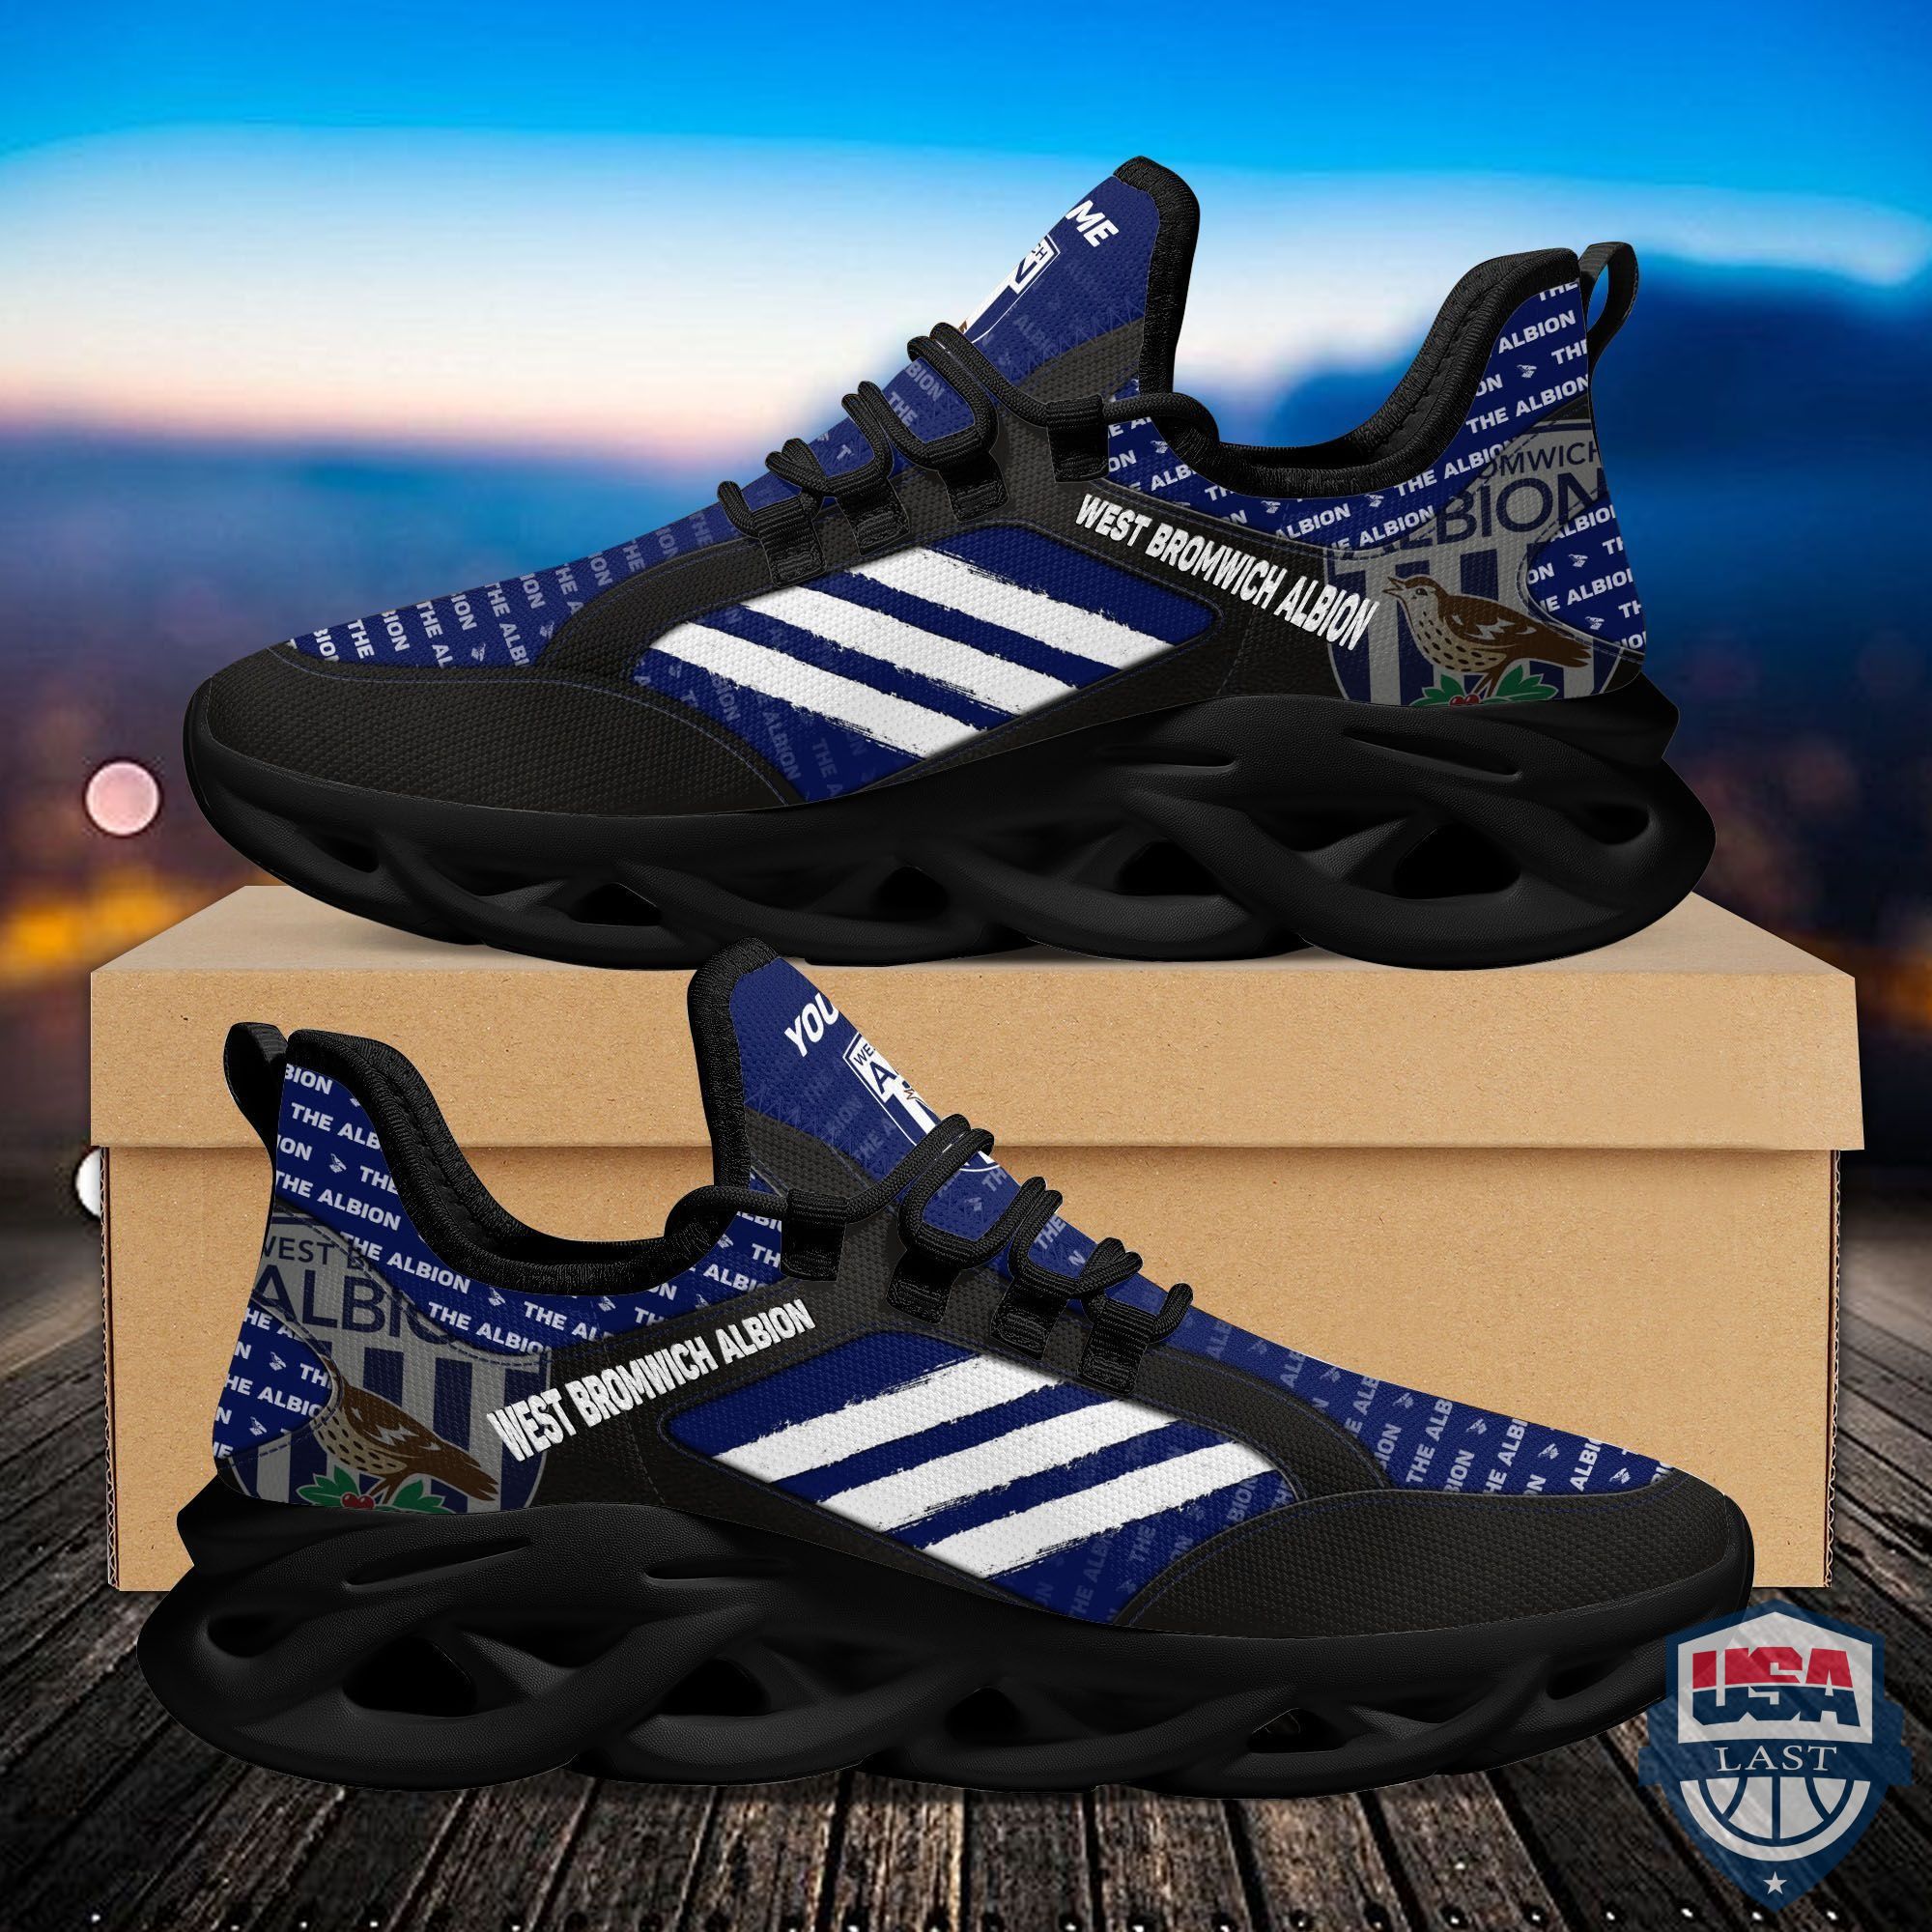 Personalized Hull City AFC Max Soul Sneakers Running Shoes